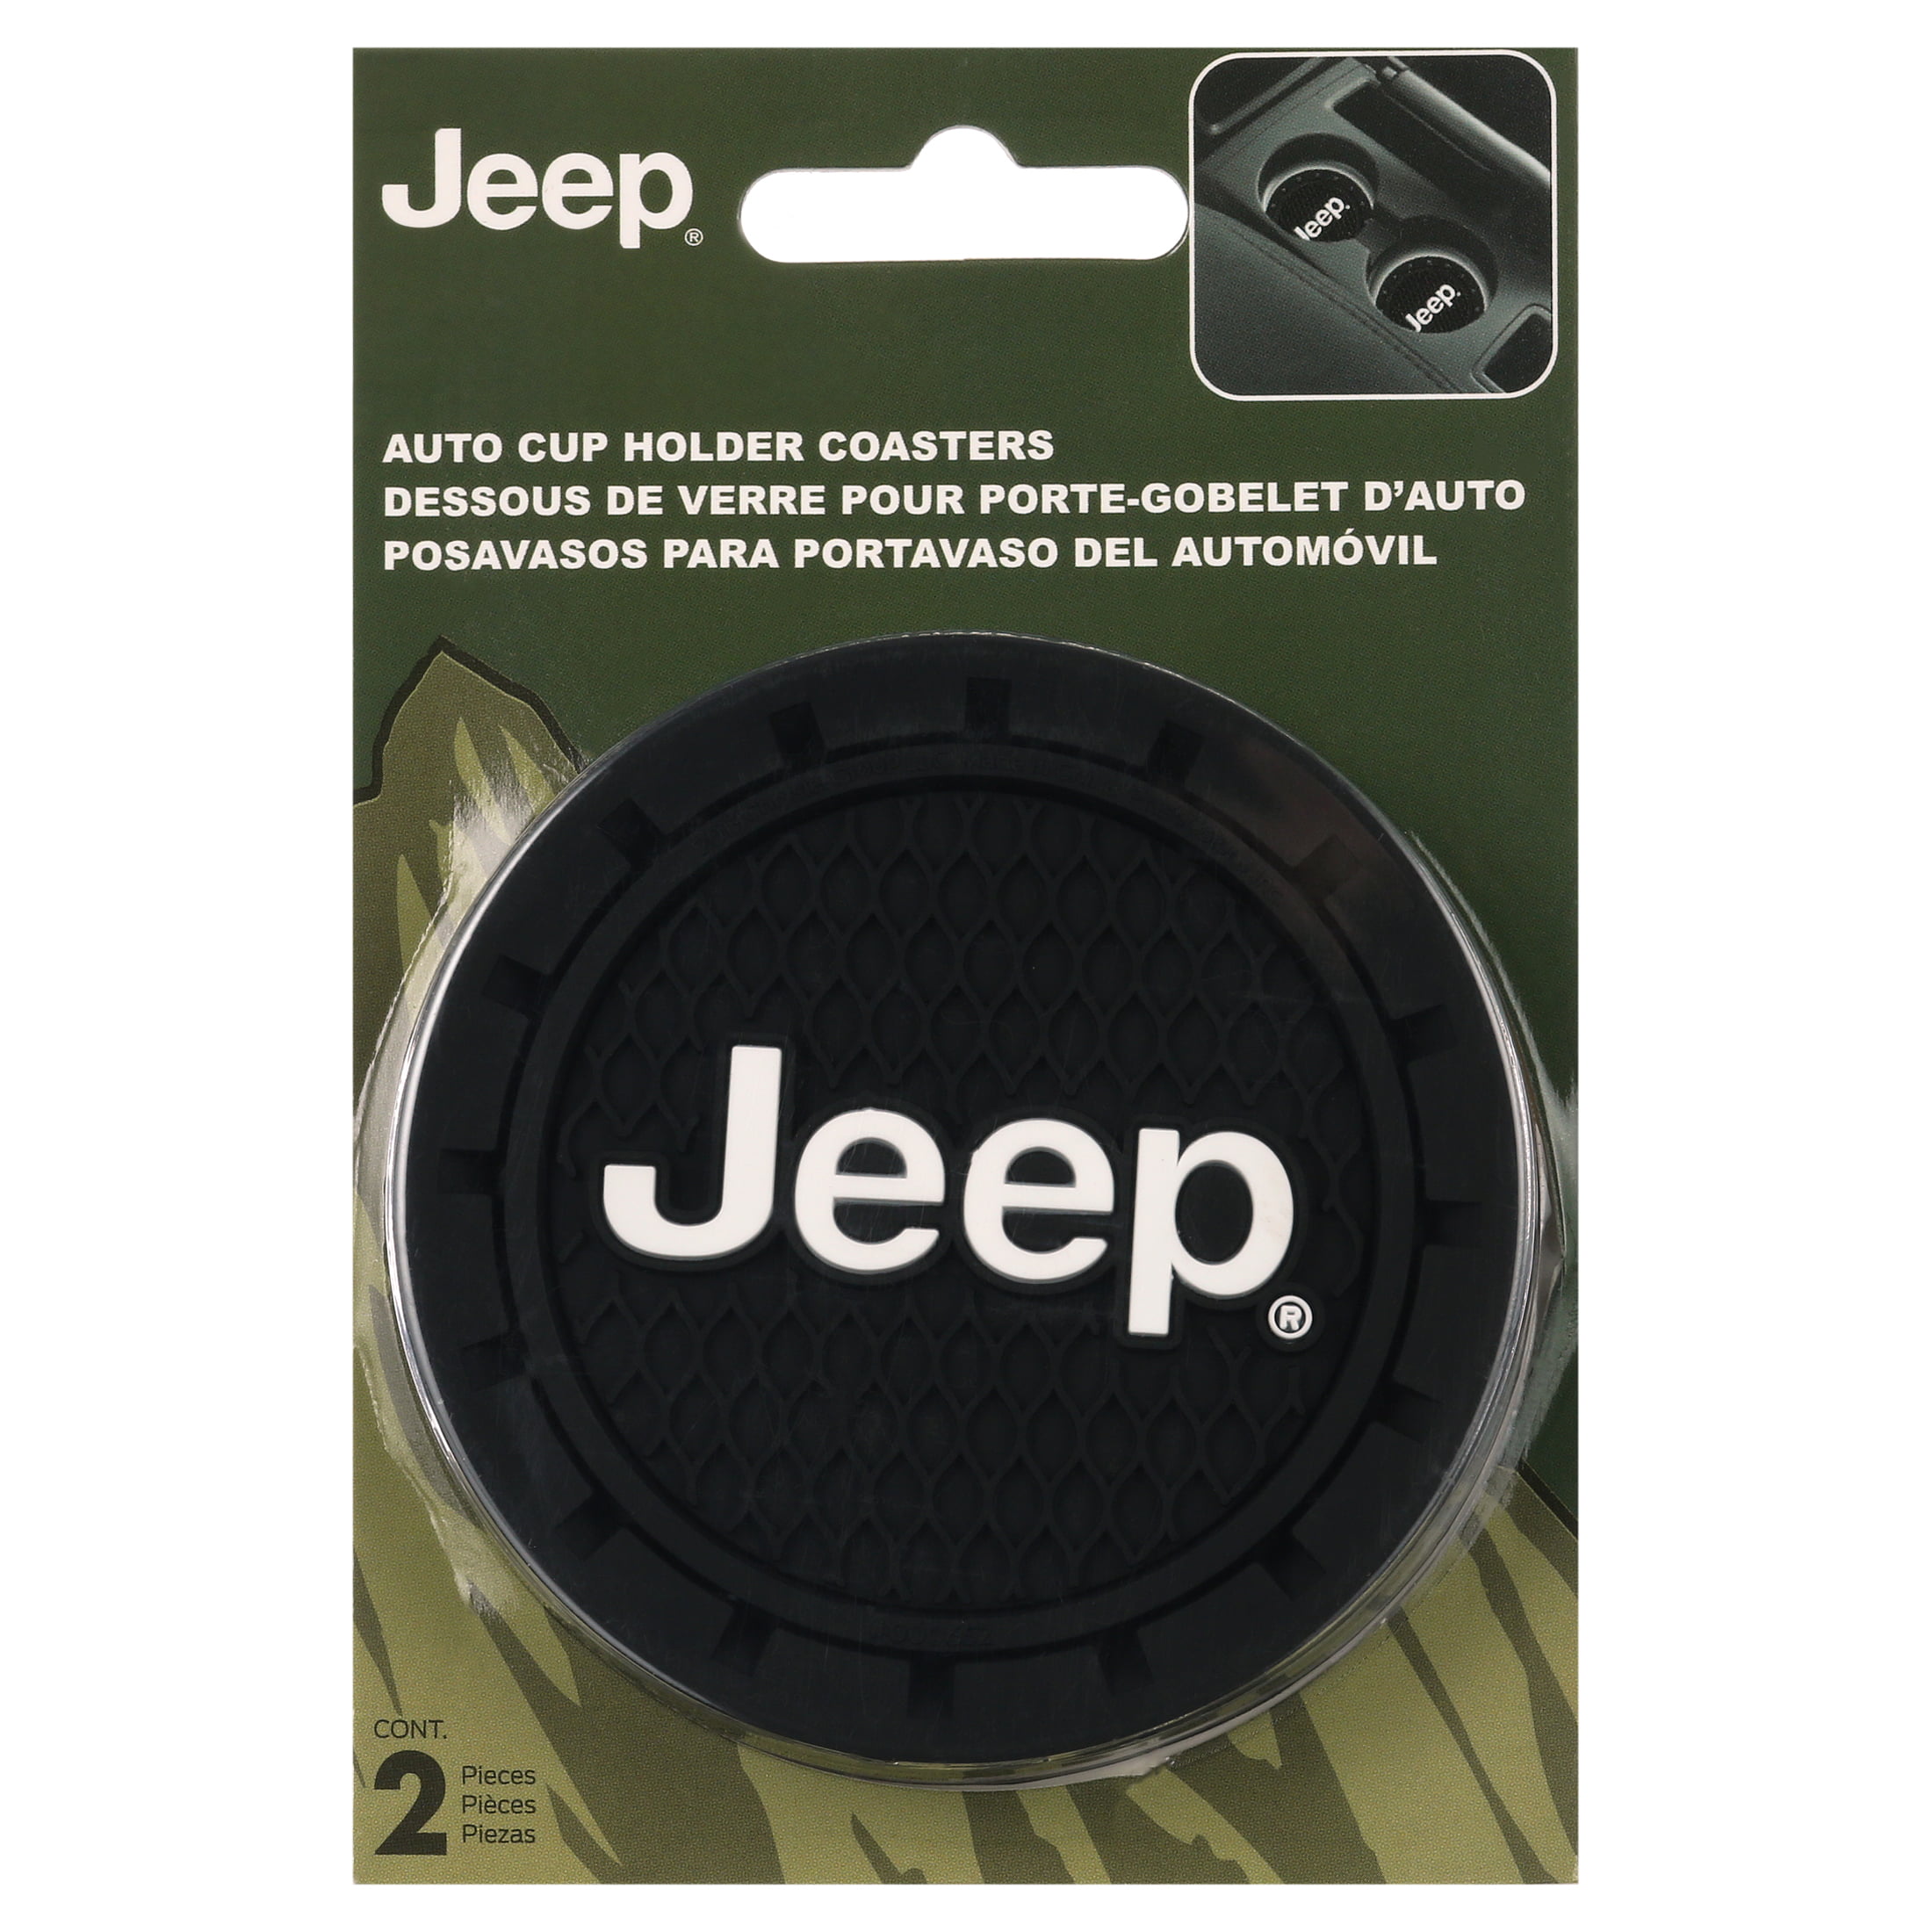 Generic Jeep Auto Cup Holder Coaster Pack of 2 